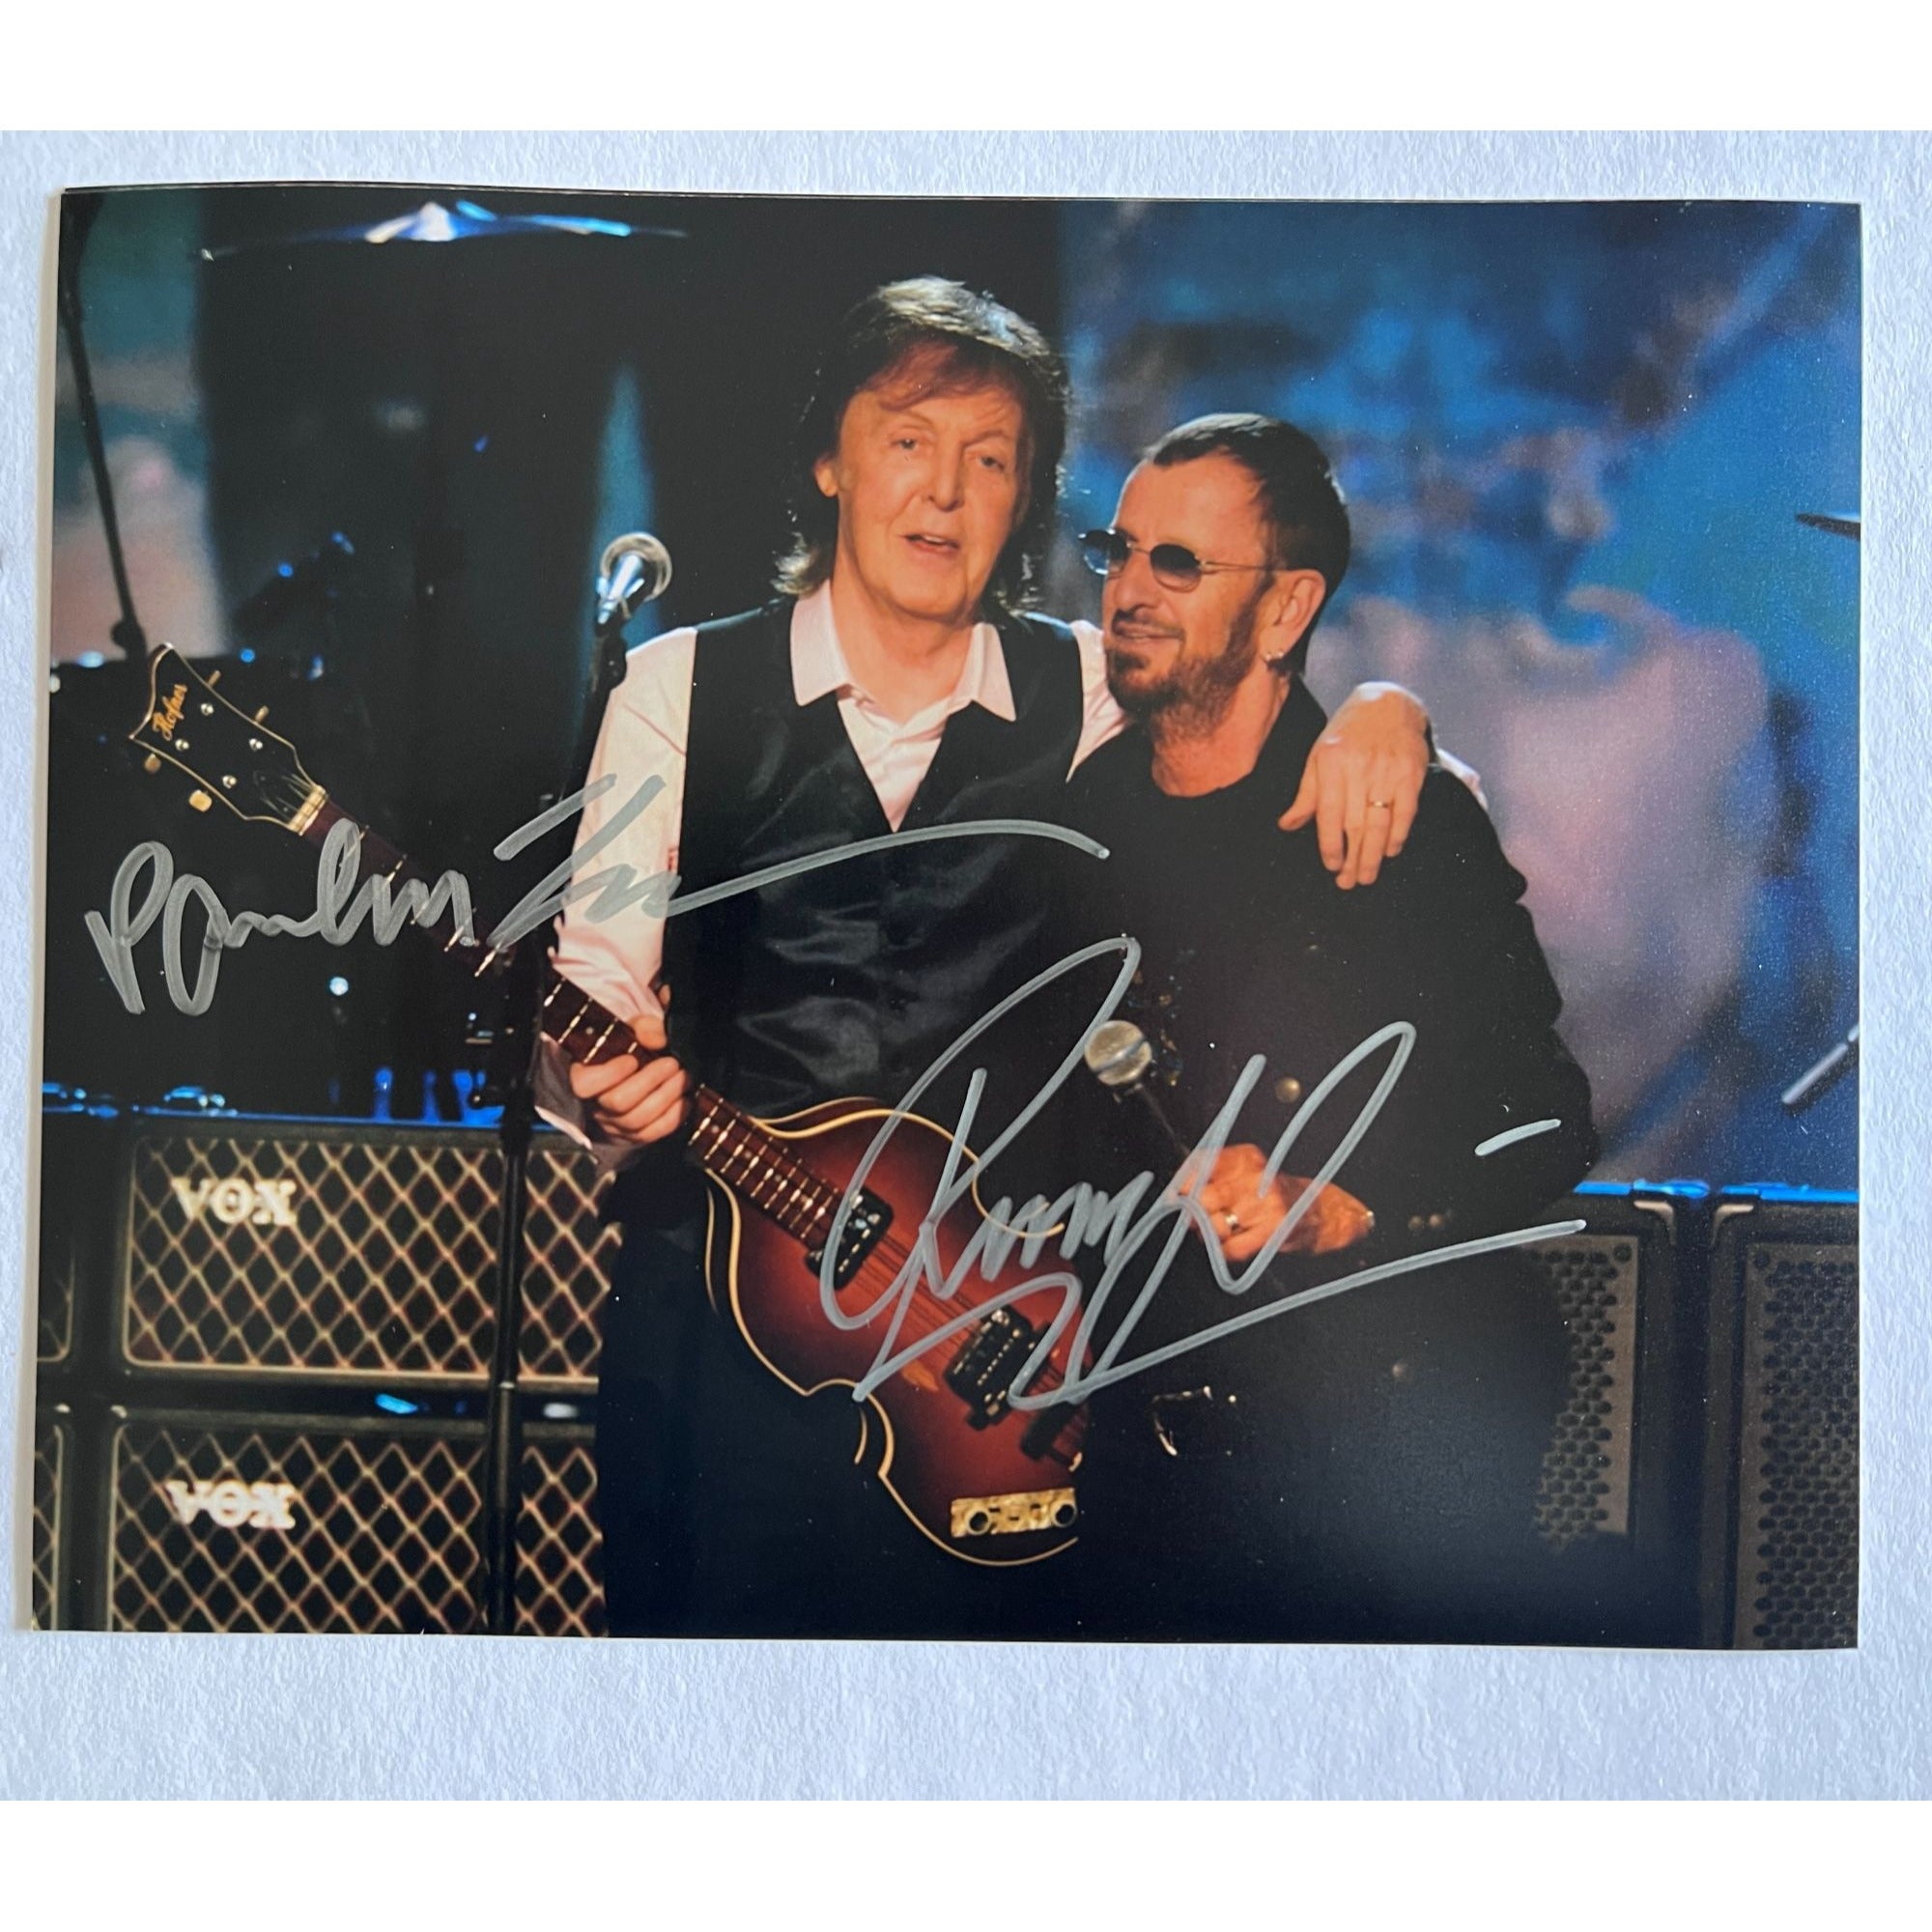 The Beatles Paul McCartney Ringo Starr 8x10 photo signed with proof